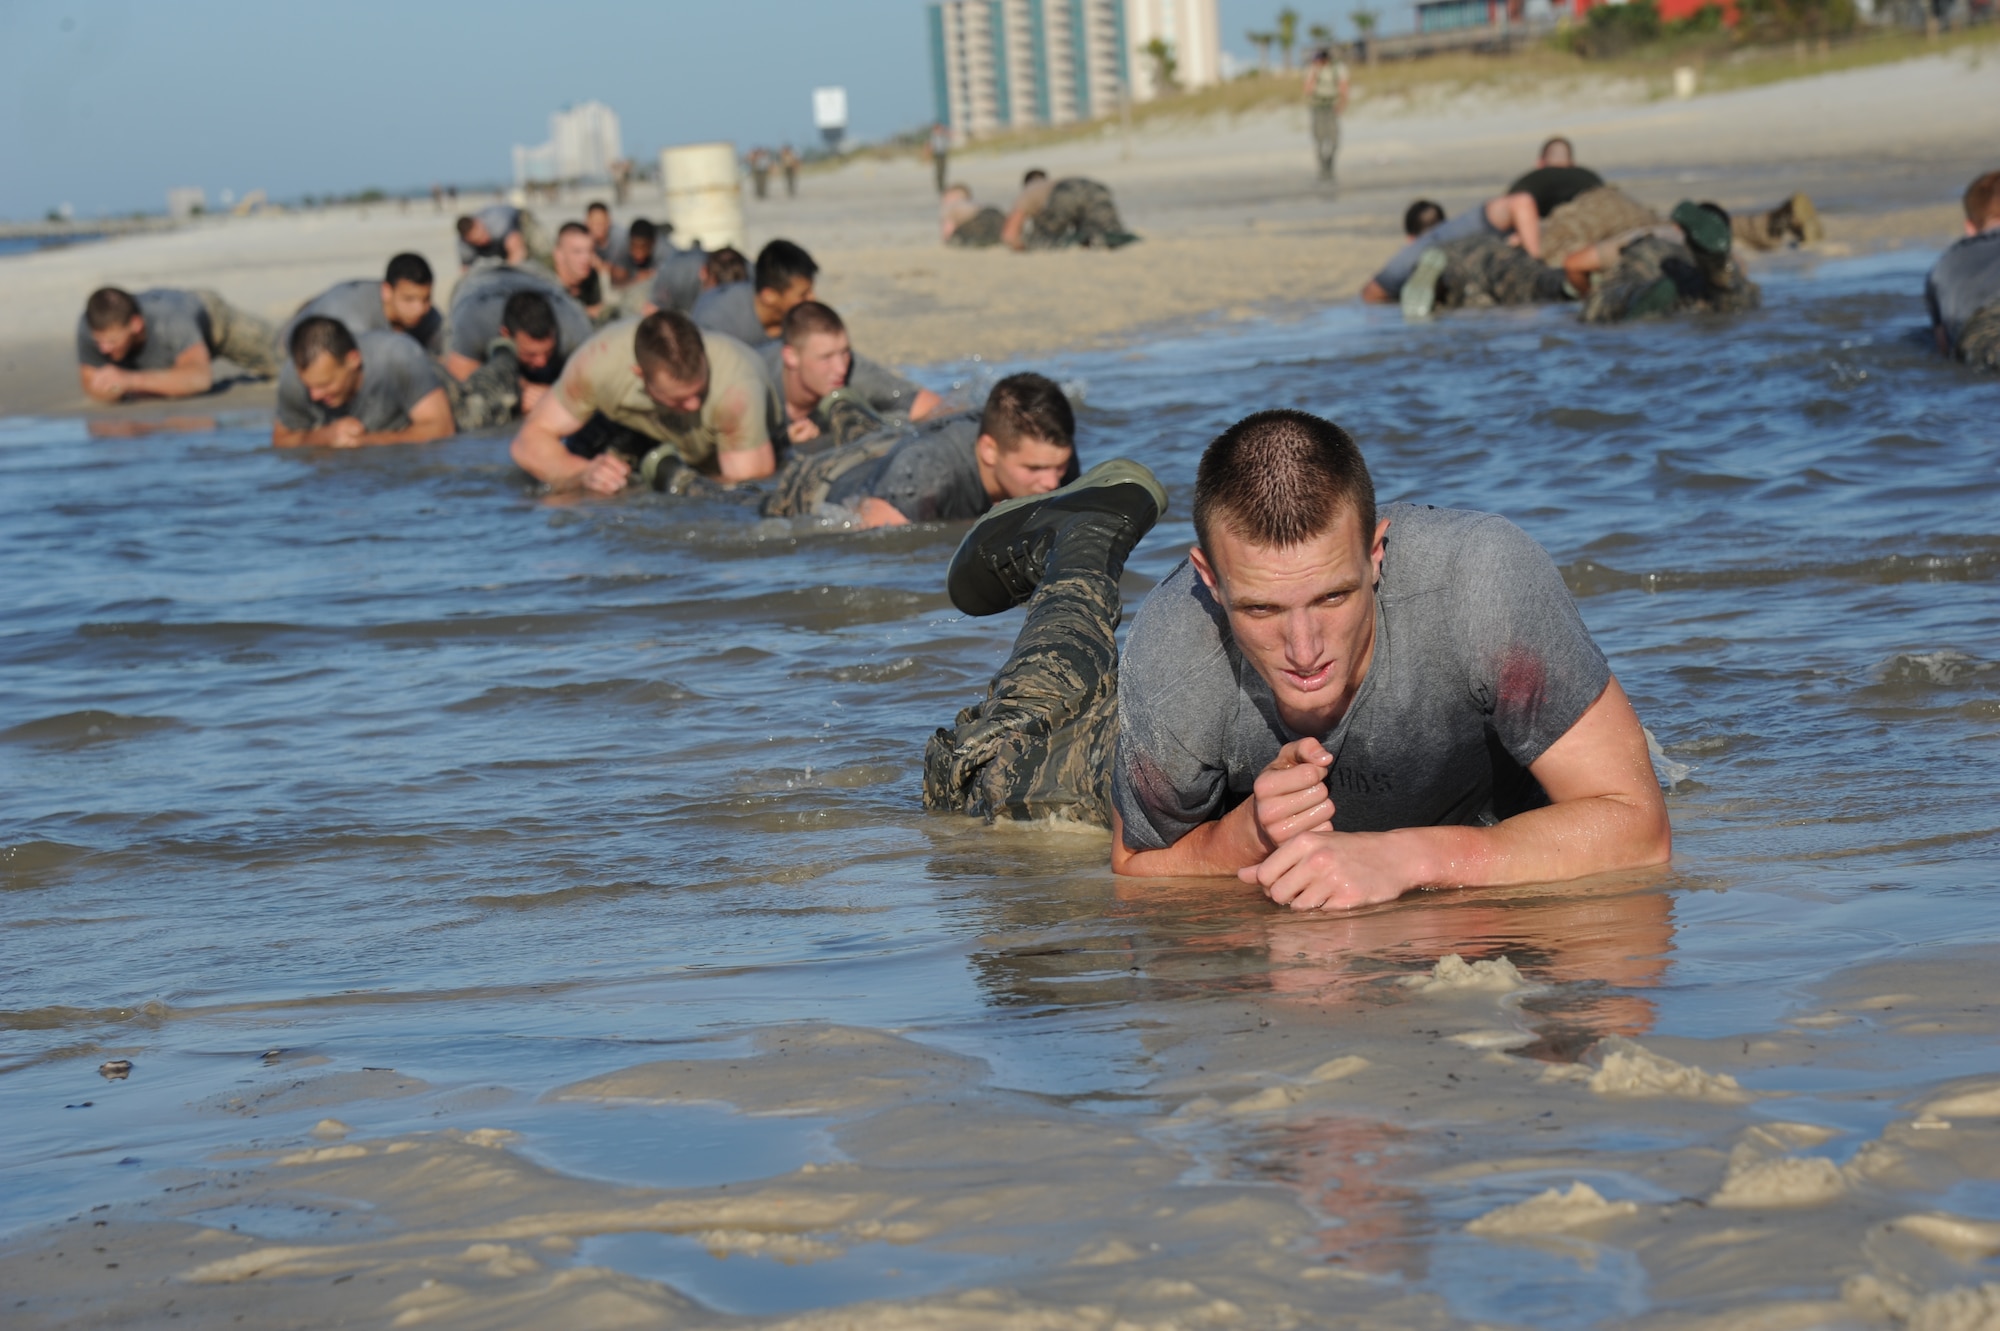 Airman 1st Class Blake Richards, 334th Training Squadron, drags his way through a 100-meter low crawl in a puddle of water during the combat controllers’ physical training session April 12, 2013, on Biloxi beach.  Combat controllers are ground troops who are embedded with special forces teams and provide close-air support for special forces units. While at Keesler, trainees learn how to run, swim, carry a rucksack and conduct air traffic control. These Airmen are prepared physically and mentally for the demands of the combat controller pipeline while earning air traffic control certification in just 15 weeks.  (U.S. Air Force photo by Kemberly Groue)